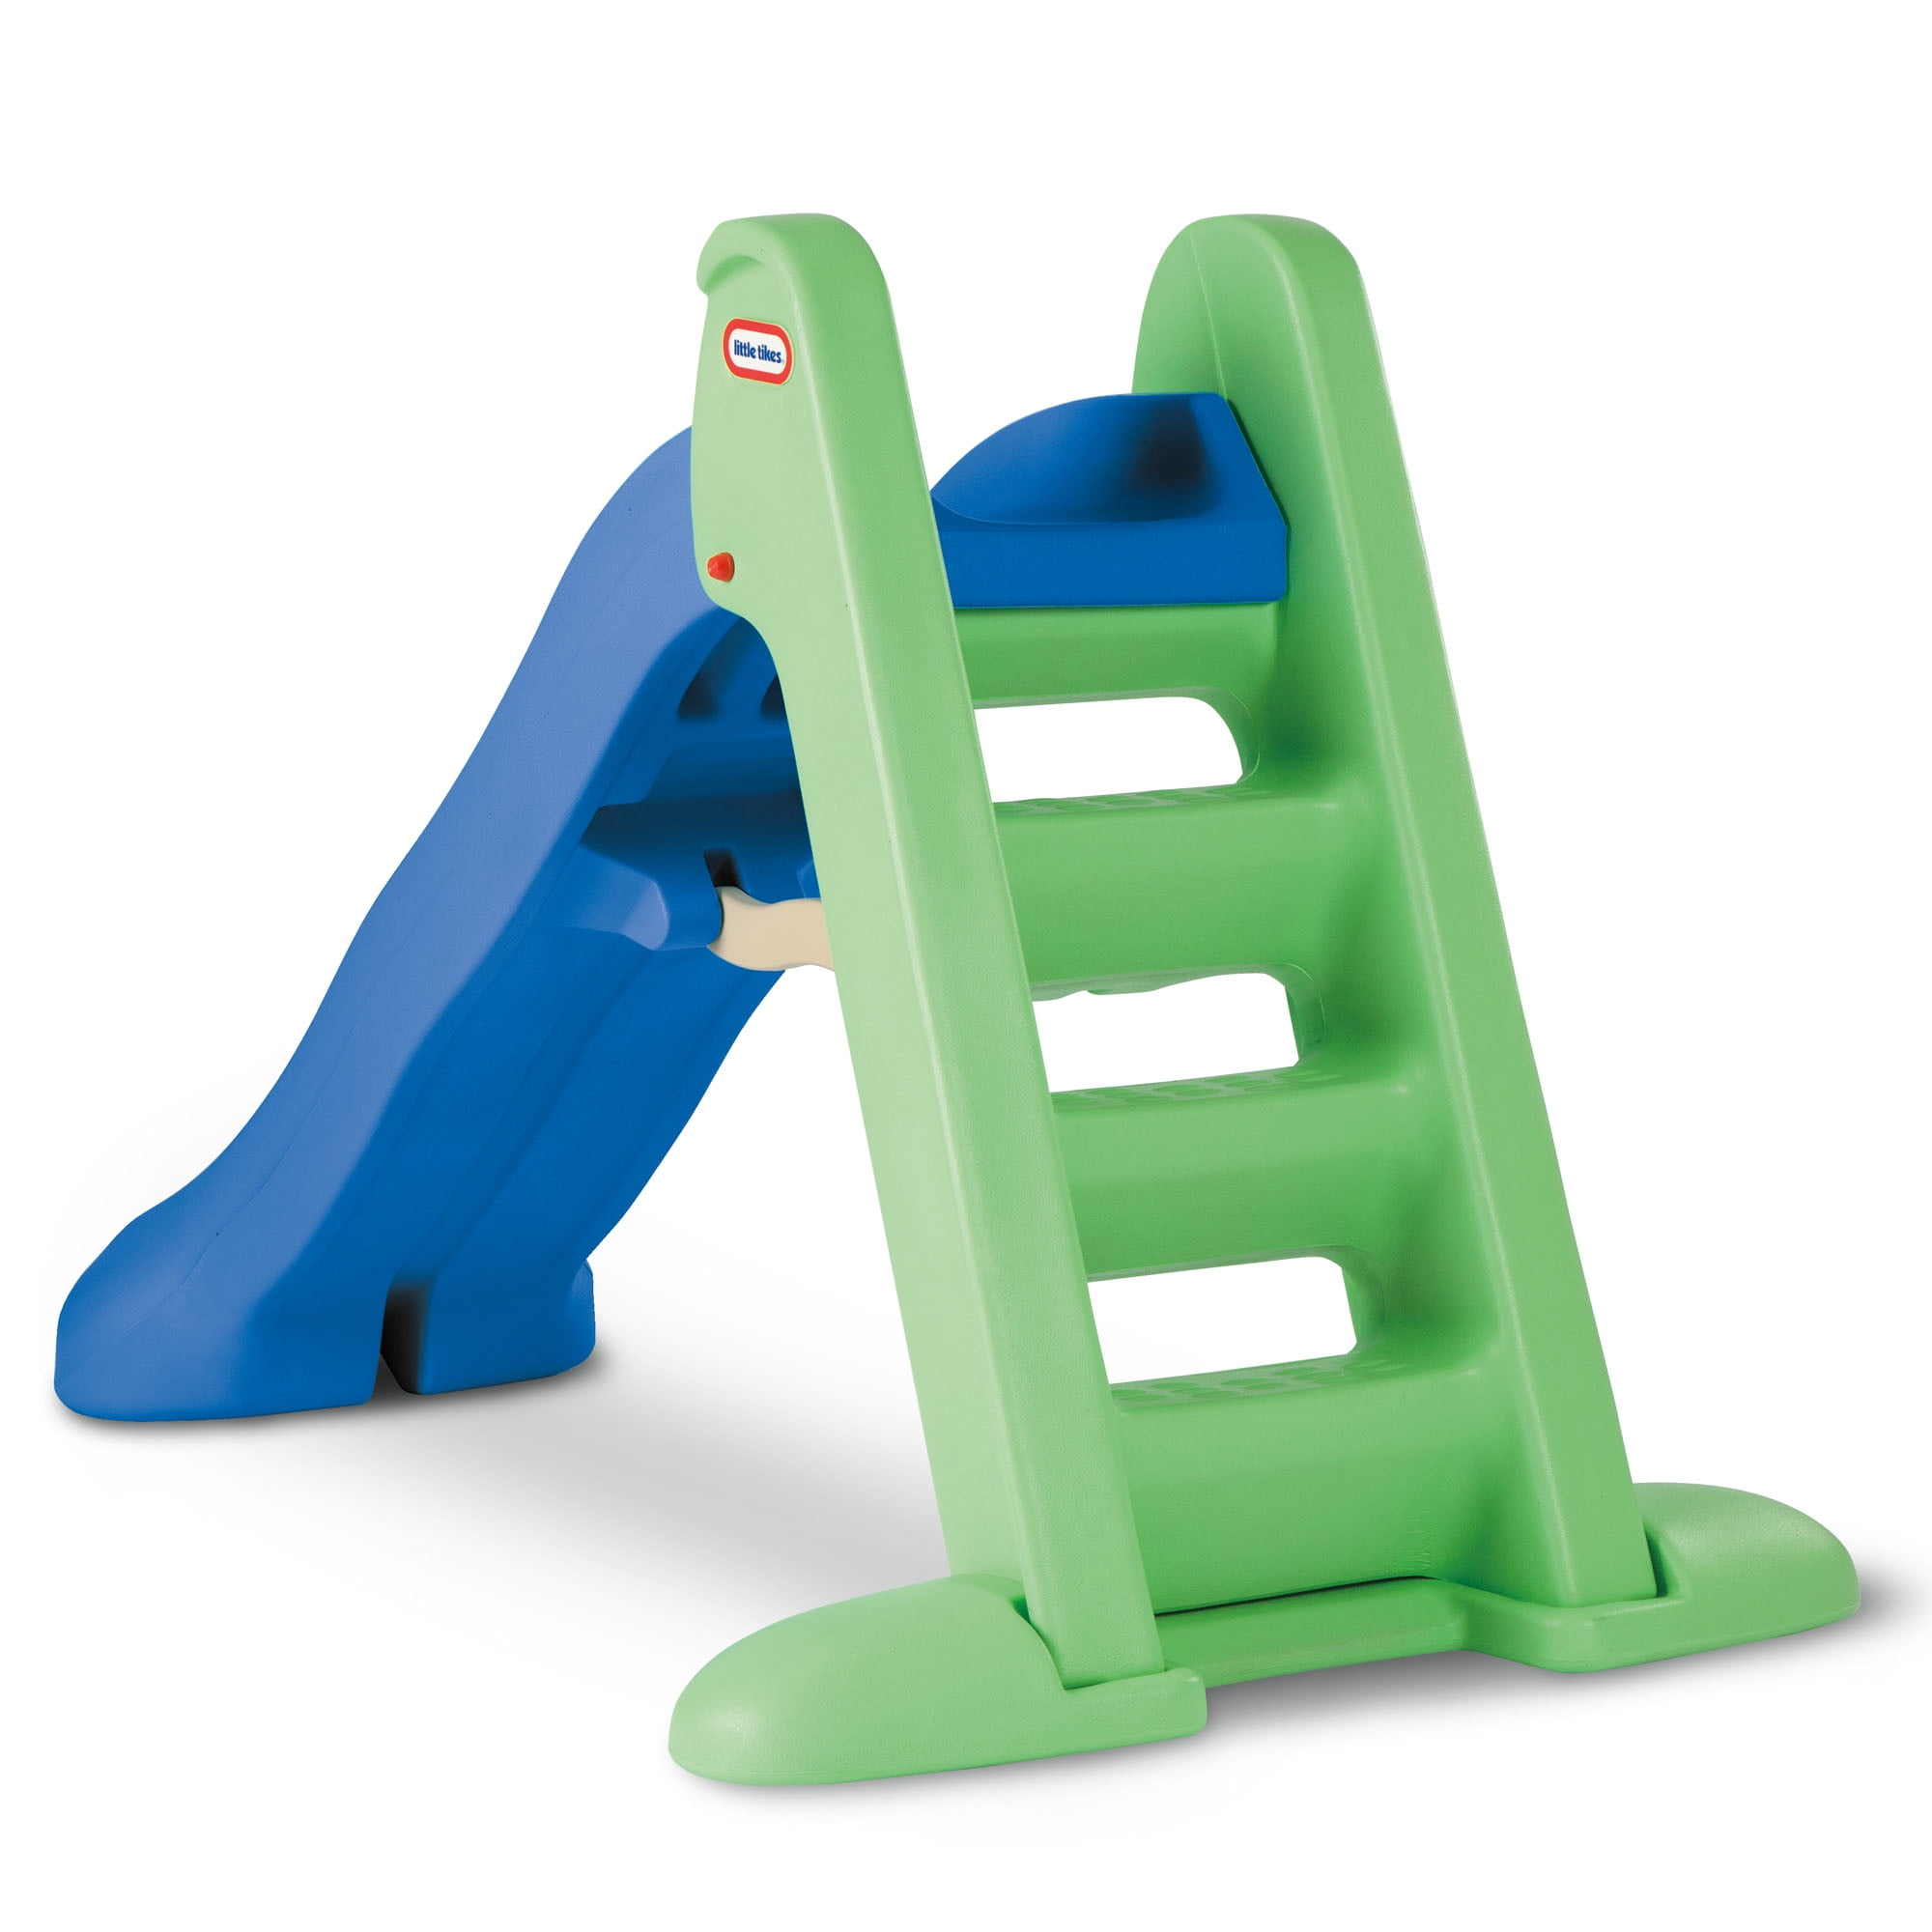 Little Tikes Easy Store Large Playground Slide with Folding for Easy Storage, Outdoor Indoor Active Play, Blue and Green- For Kids Toddlers Boys Girls Ages 2 to 6 Year old - 3